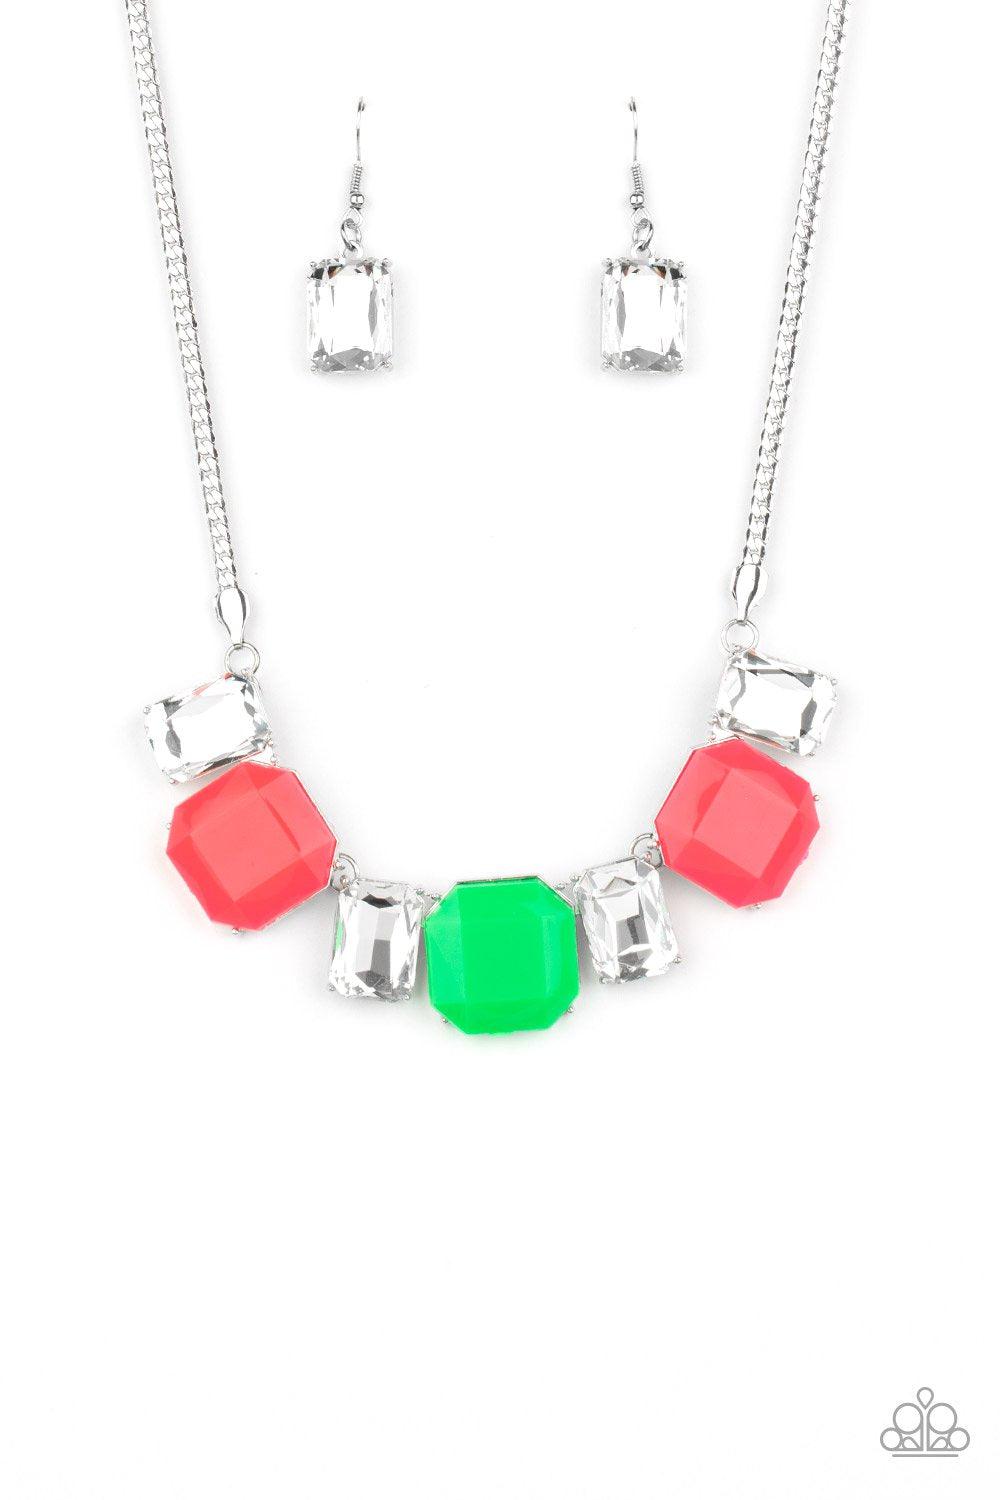 Royal Crest Neon Pink and Green Necklace - Paparazzi Accessories-CarasShop.com - $5 Jewelry by Cara Jewels